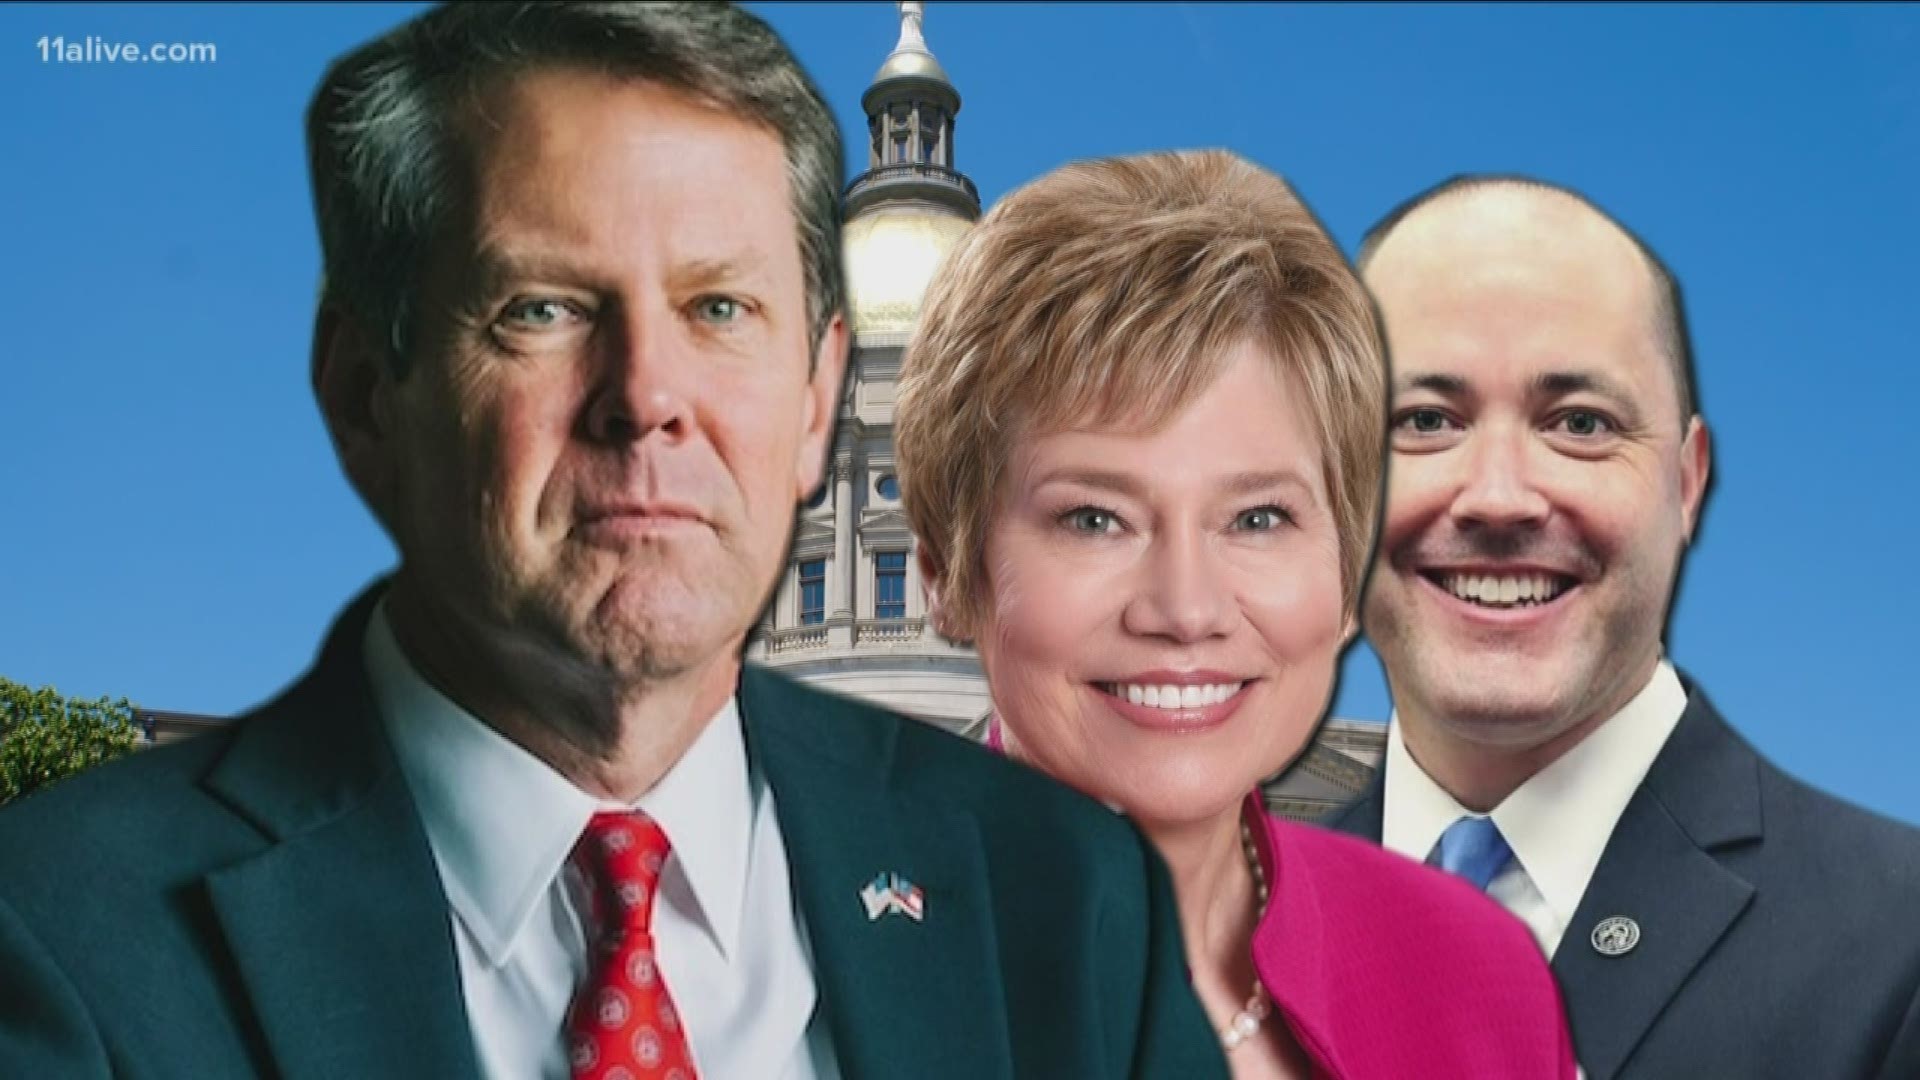 Attorneys representing Governor Brian Kemp and other state leaders say the state is interested in protecting the life of the unborn.